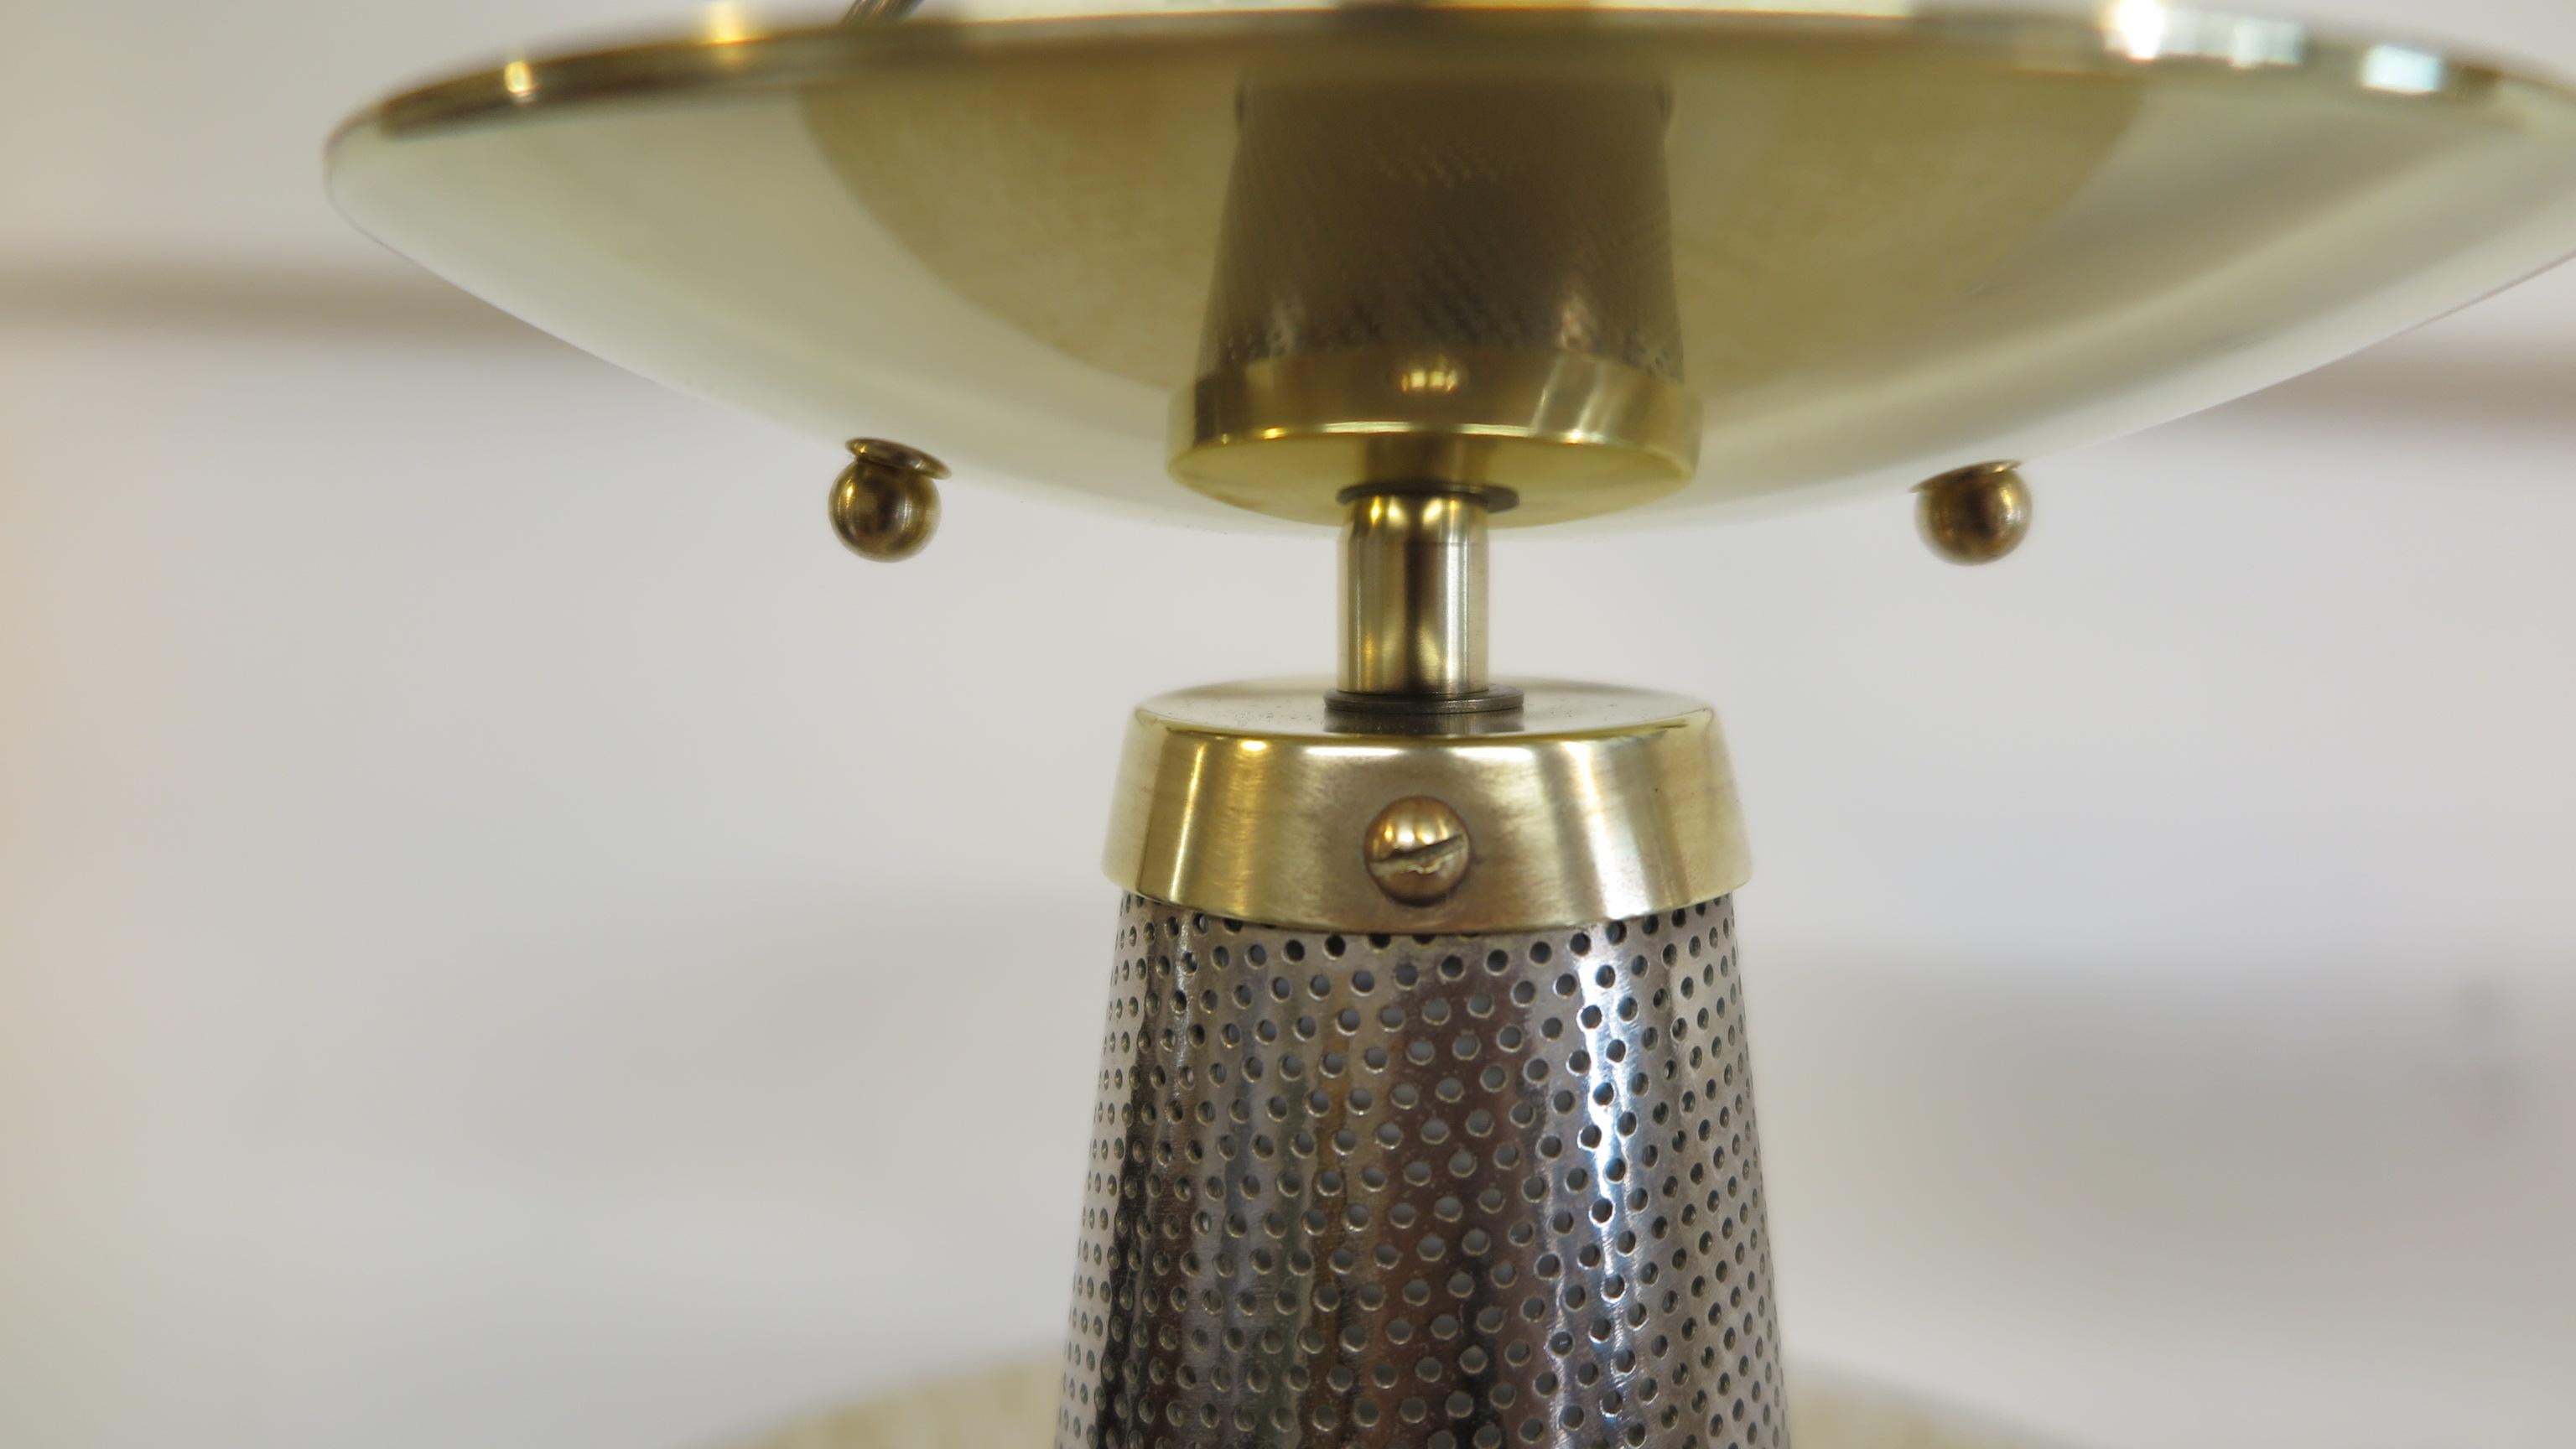 Gerald Thurston for Lightolier brass and glass pendant light. Brass and steel mesh cone supporting a domed textured glass shade with overlaid faux gilding to the underside. Lightolier labels to underside. Very special, American, 1950-1959. In very